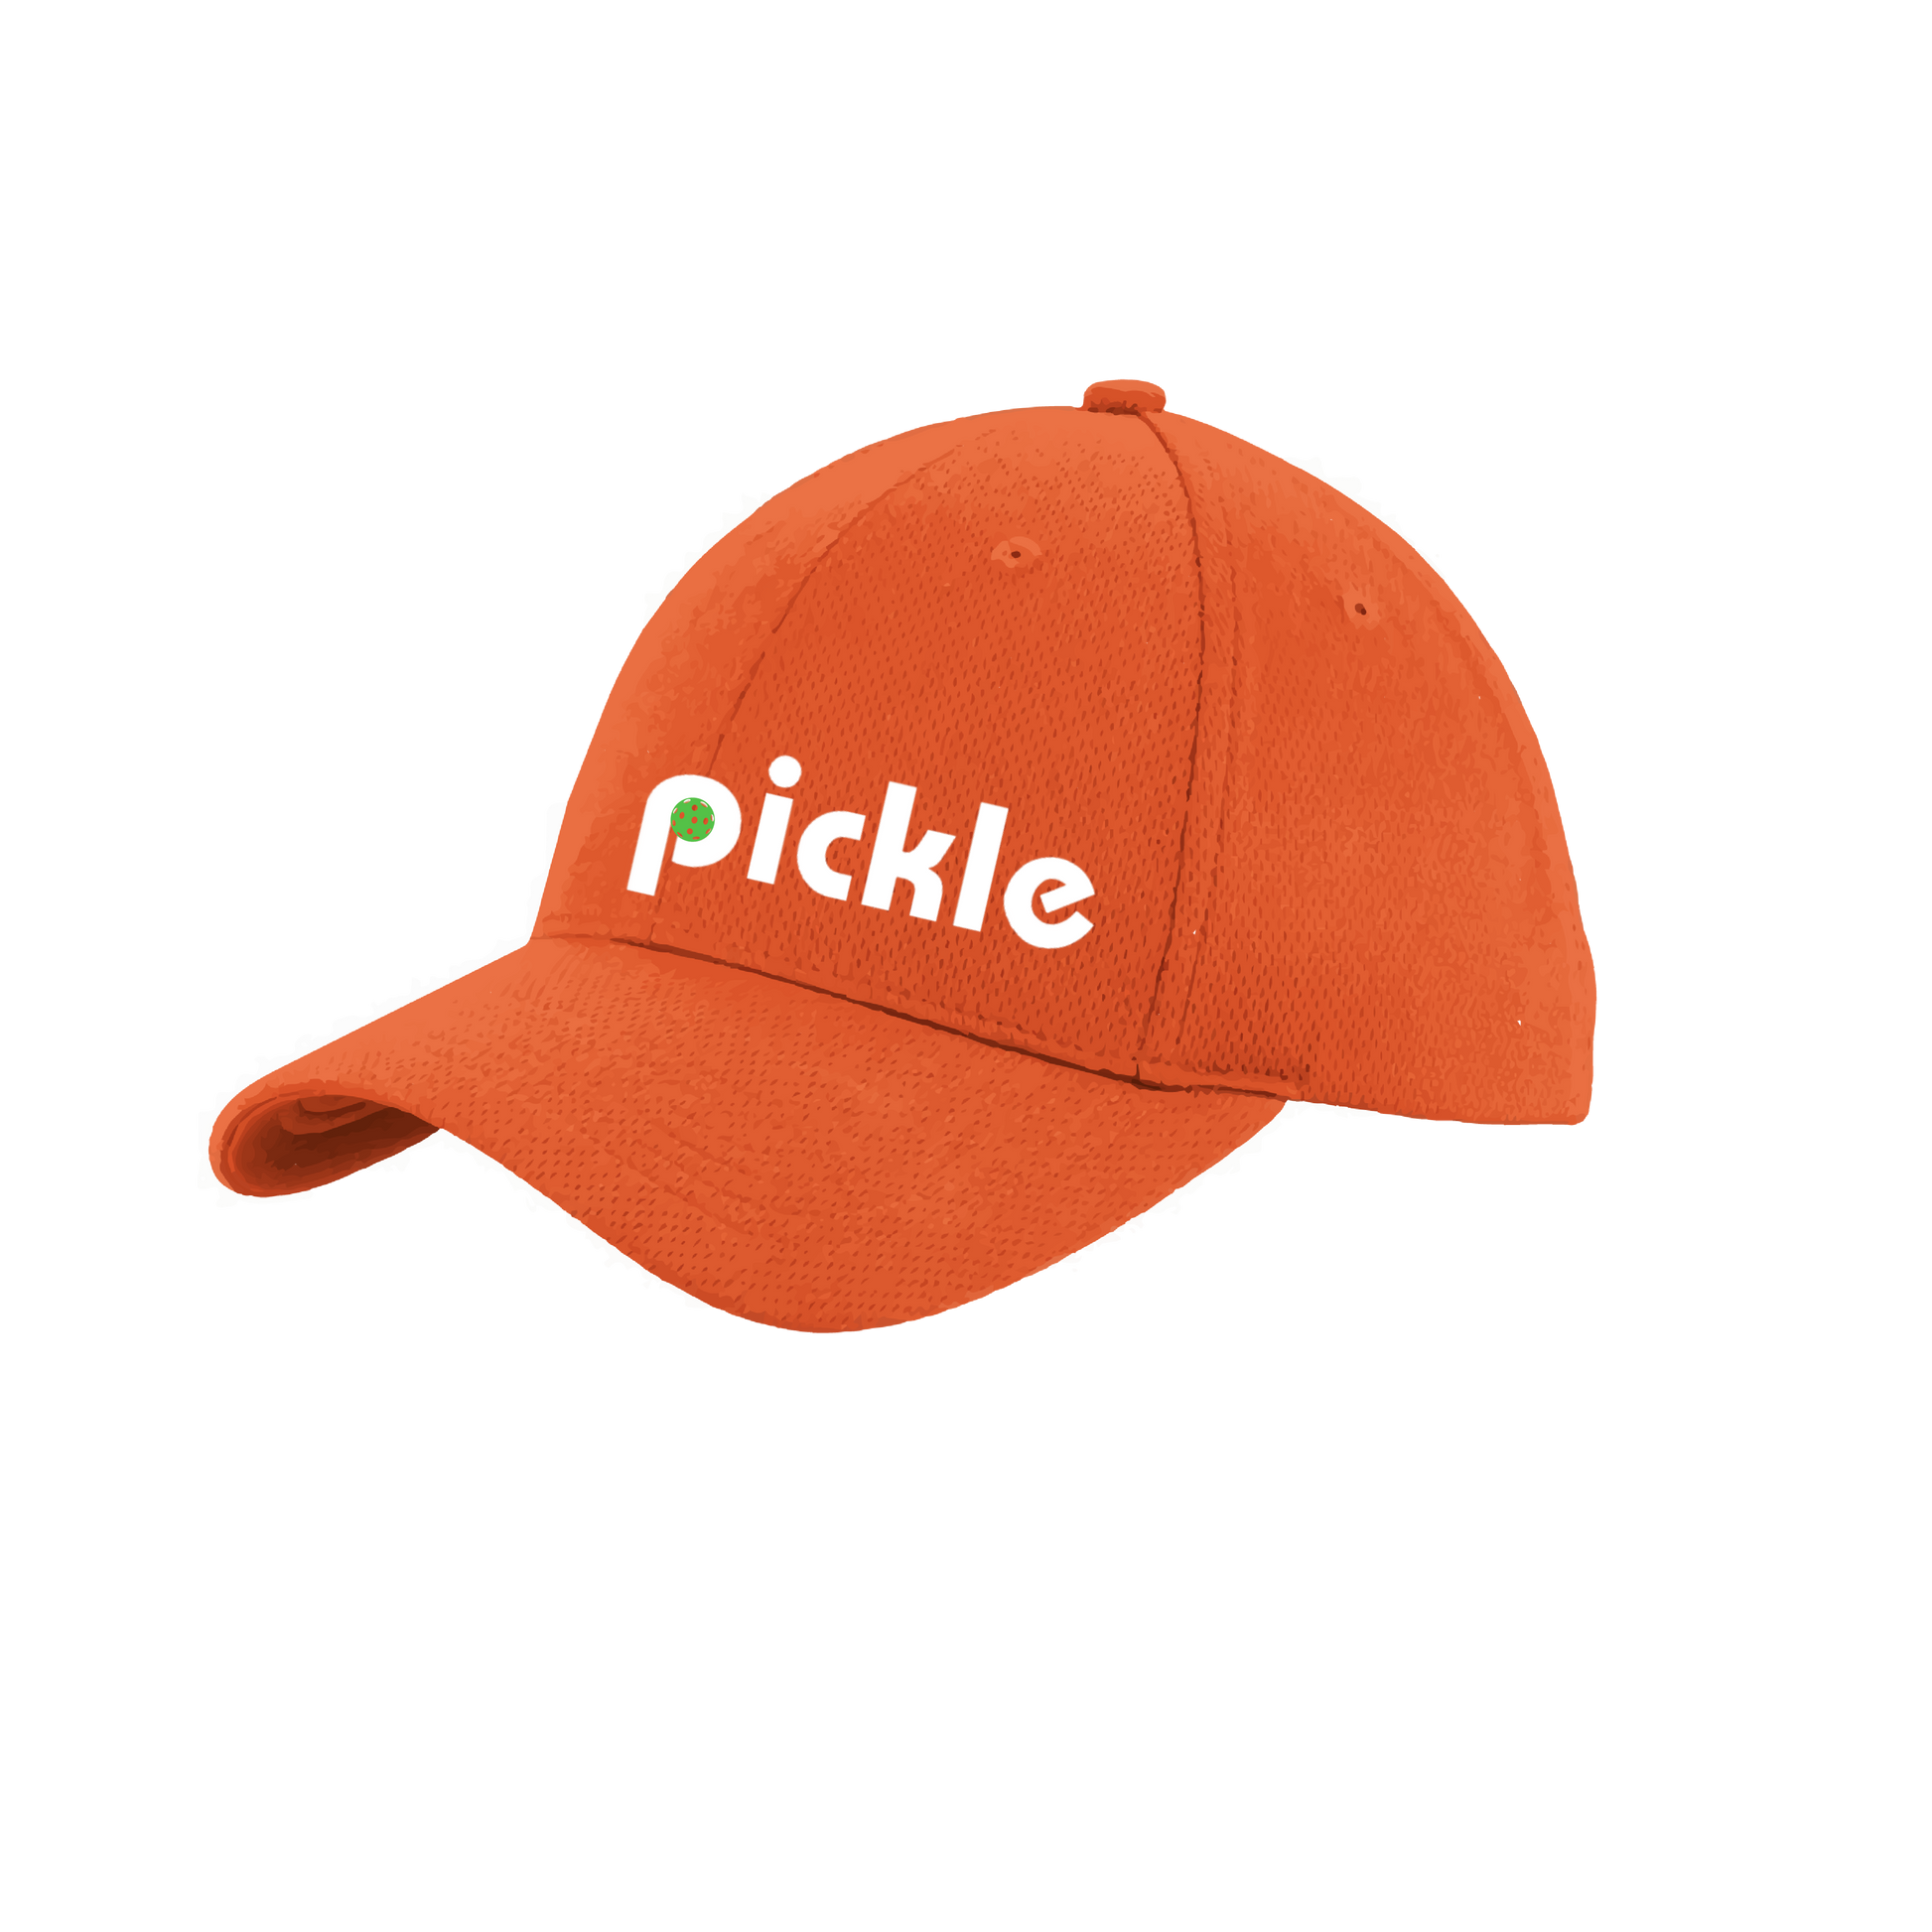 This high-performance pickleball hat is designed to keep the focus on the game and not the sun. Crafted with 100% polyester with closed-hole mesh and PosiCharge Technology, it has a hock and loop closure that ensures a perfect fit for every adult. Look great and stay cool with this functional hat.